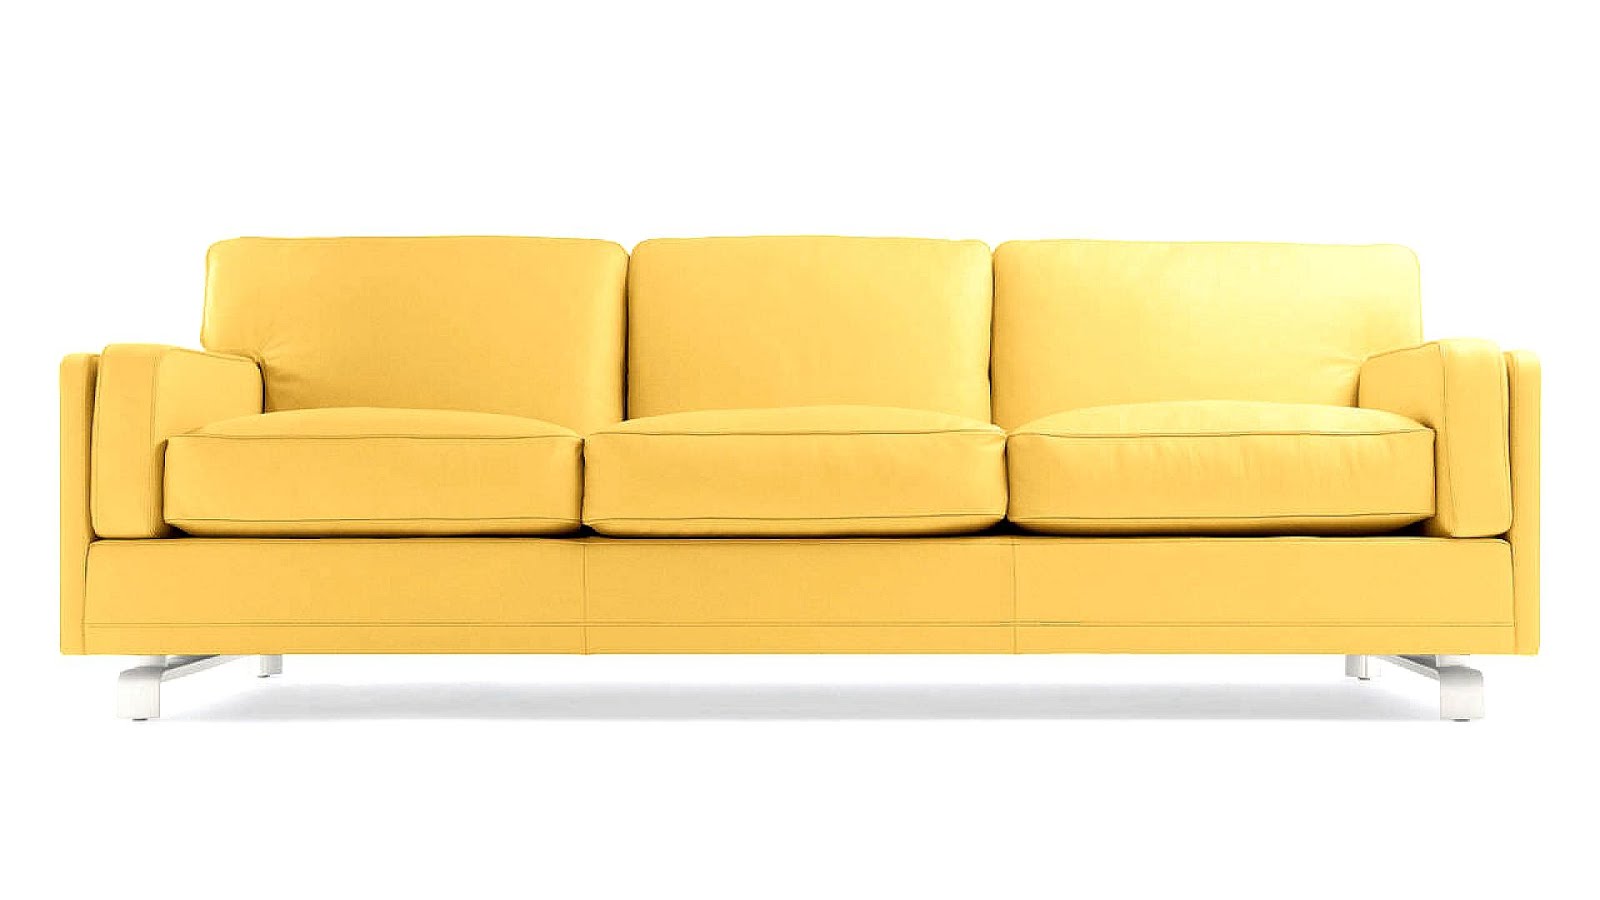 leather sofa color is turning yellow